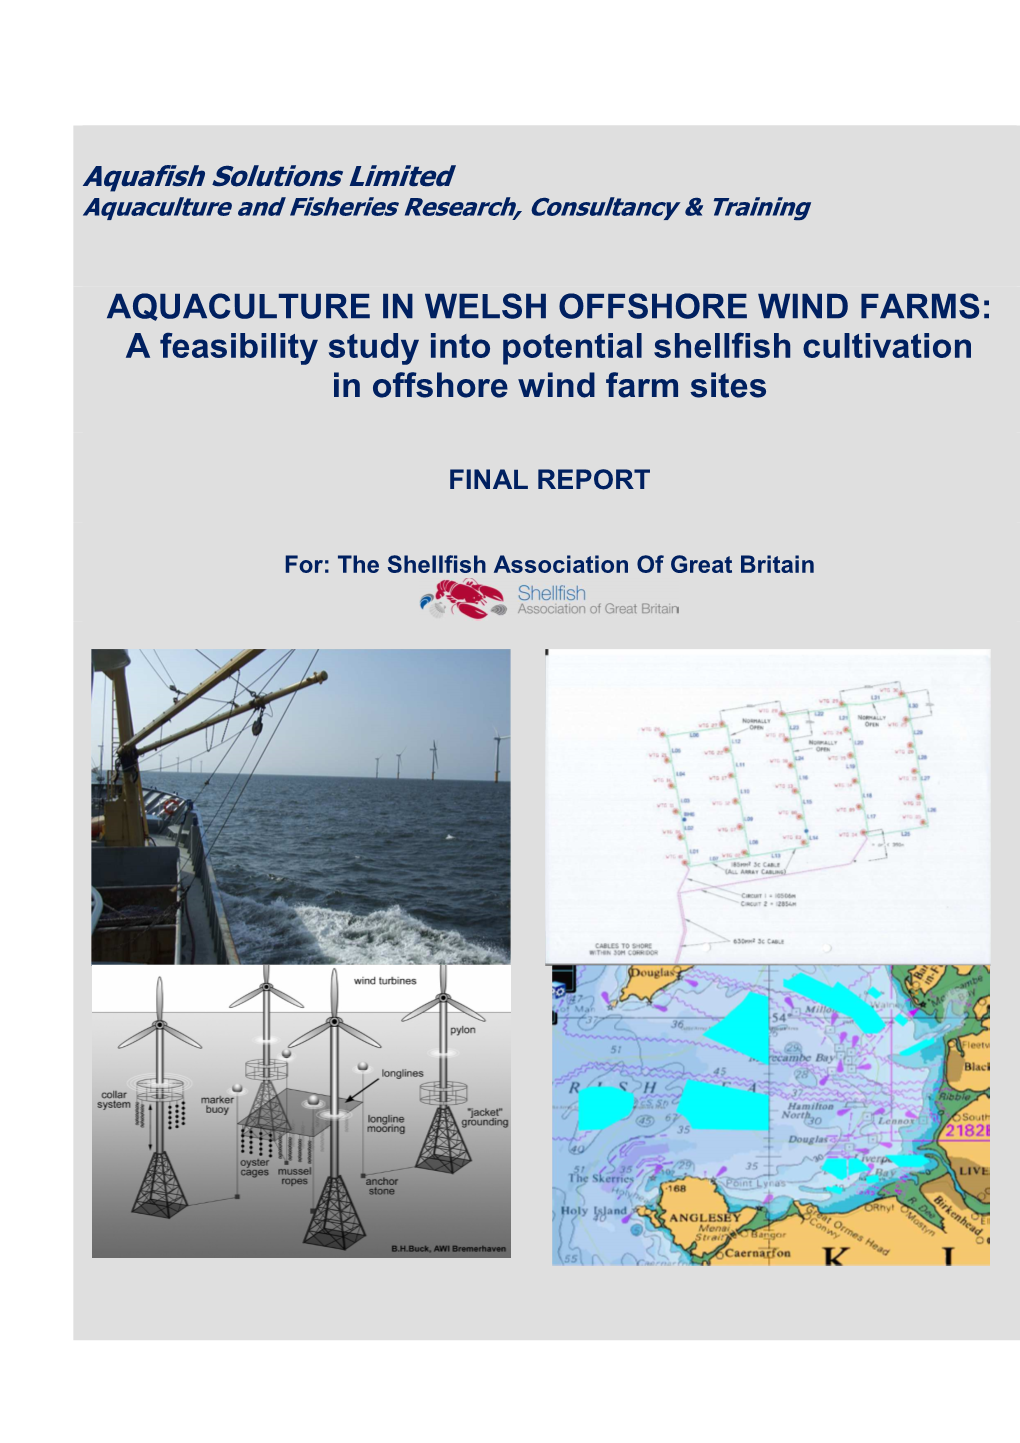 AQUACULTURE in WELSH OFFSHORE WIND FARMS: a Feasibility Study Into Potential Shellfish Cultivation in Offshore Wind Farm Sites